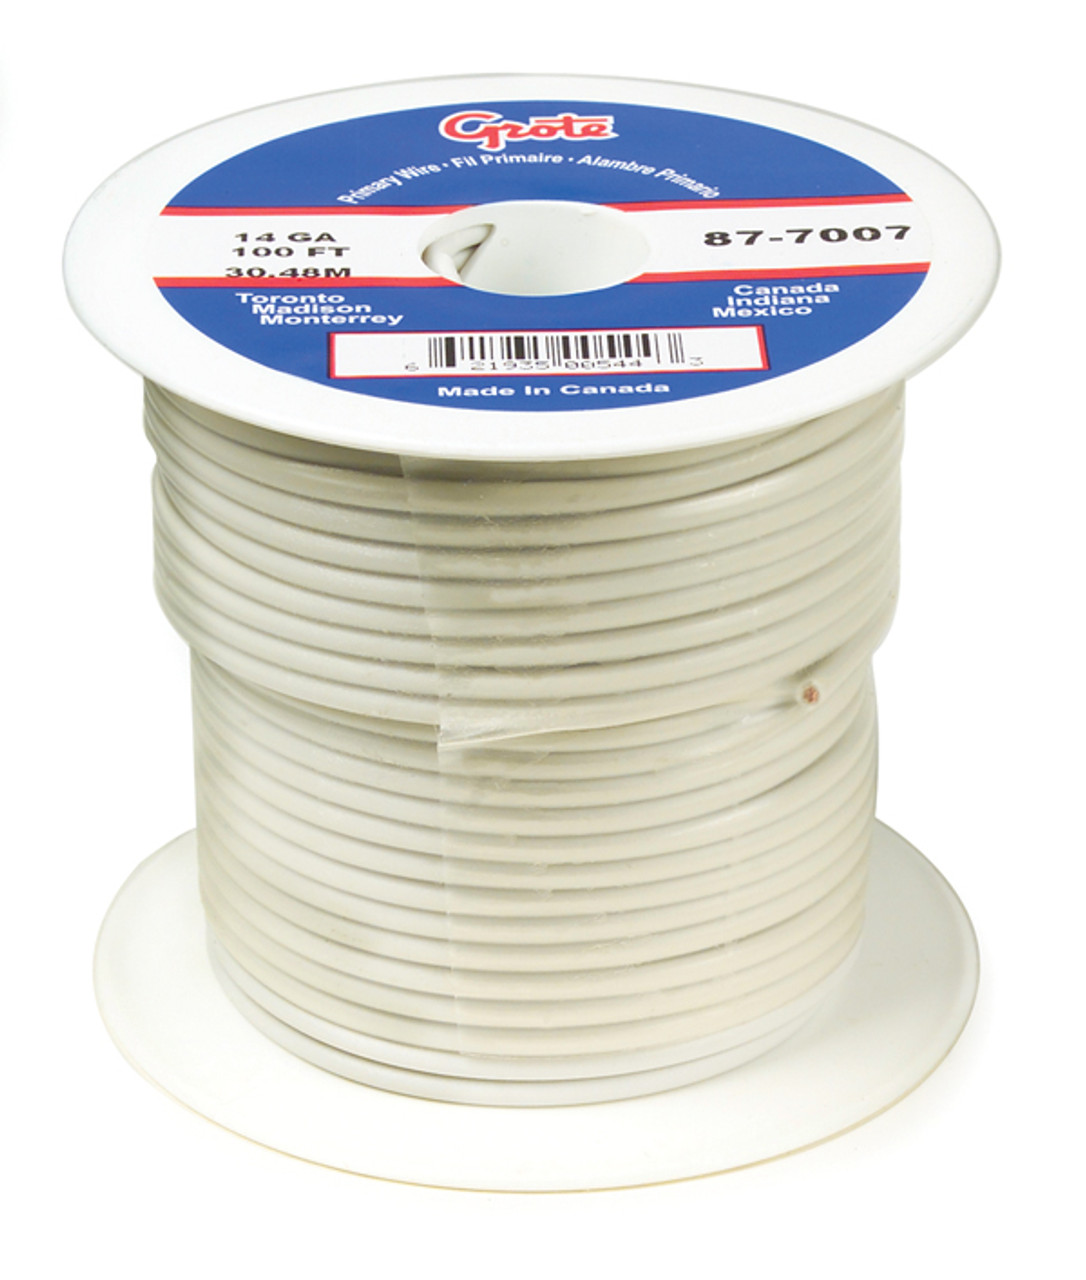 18 AWG General Purpose Thermo Plastic Wire @ 1000' - White  88-9007